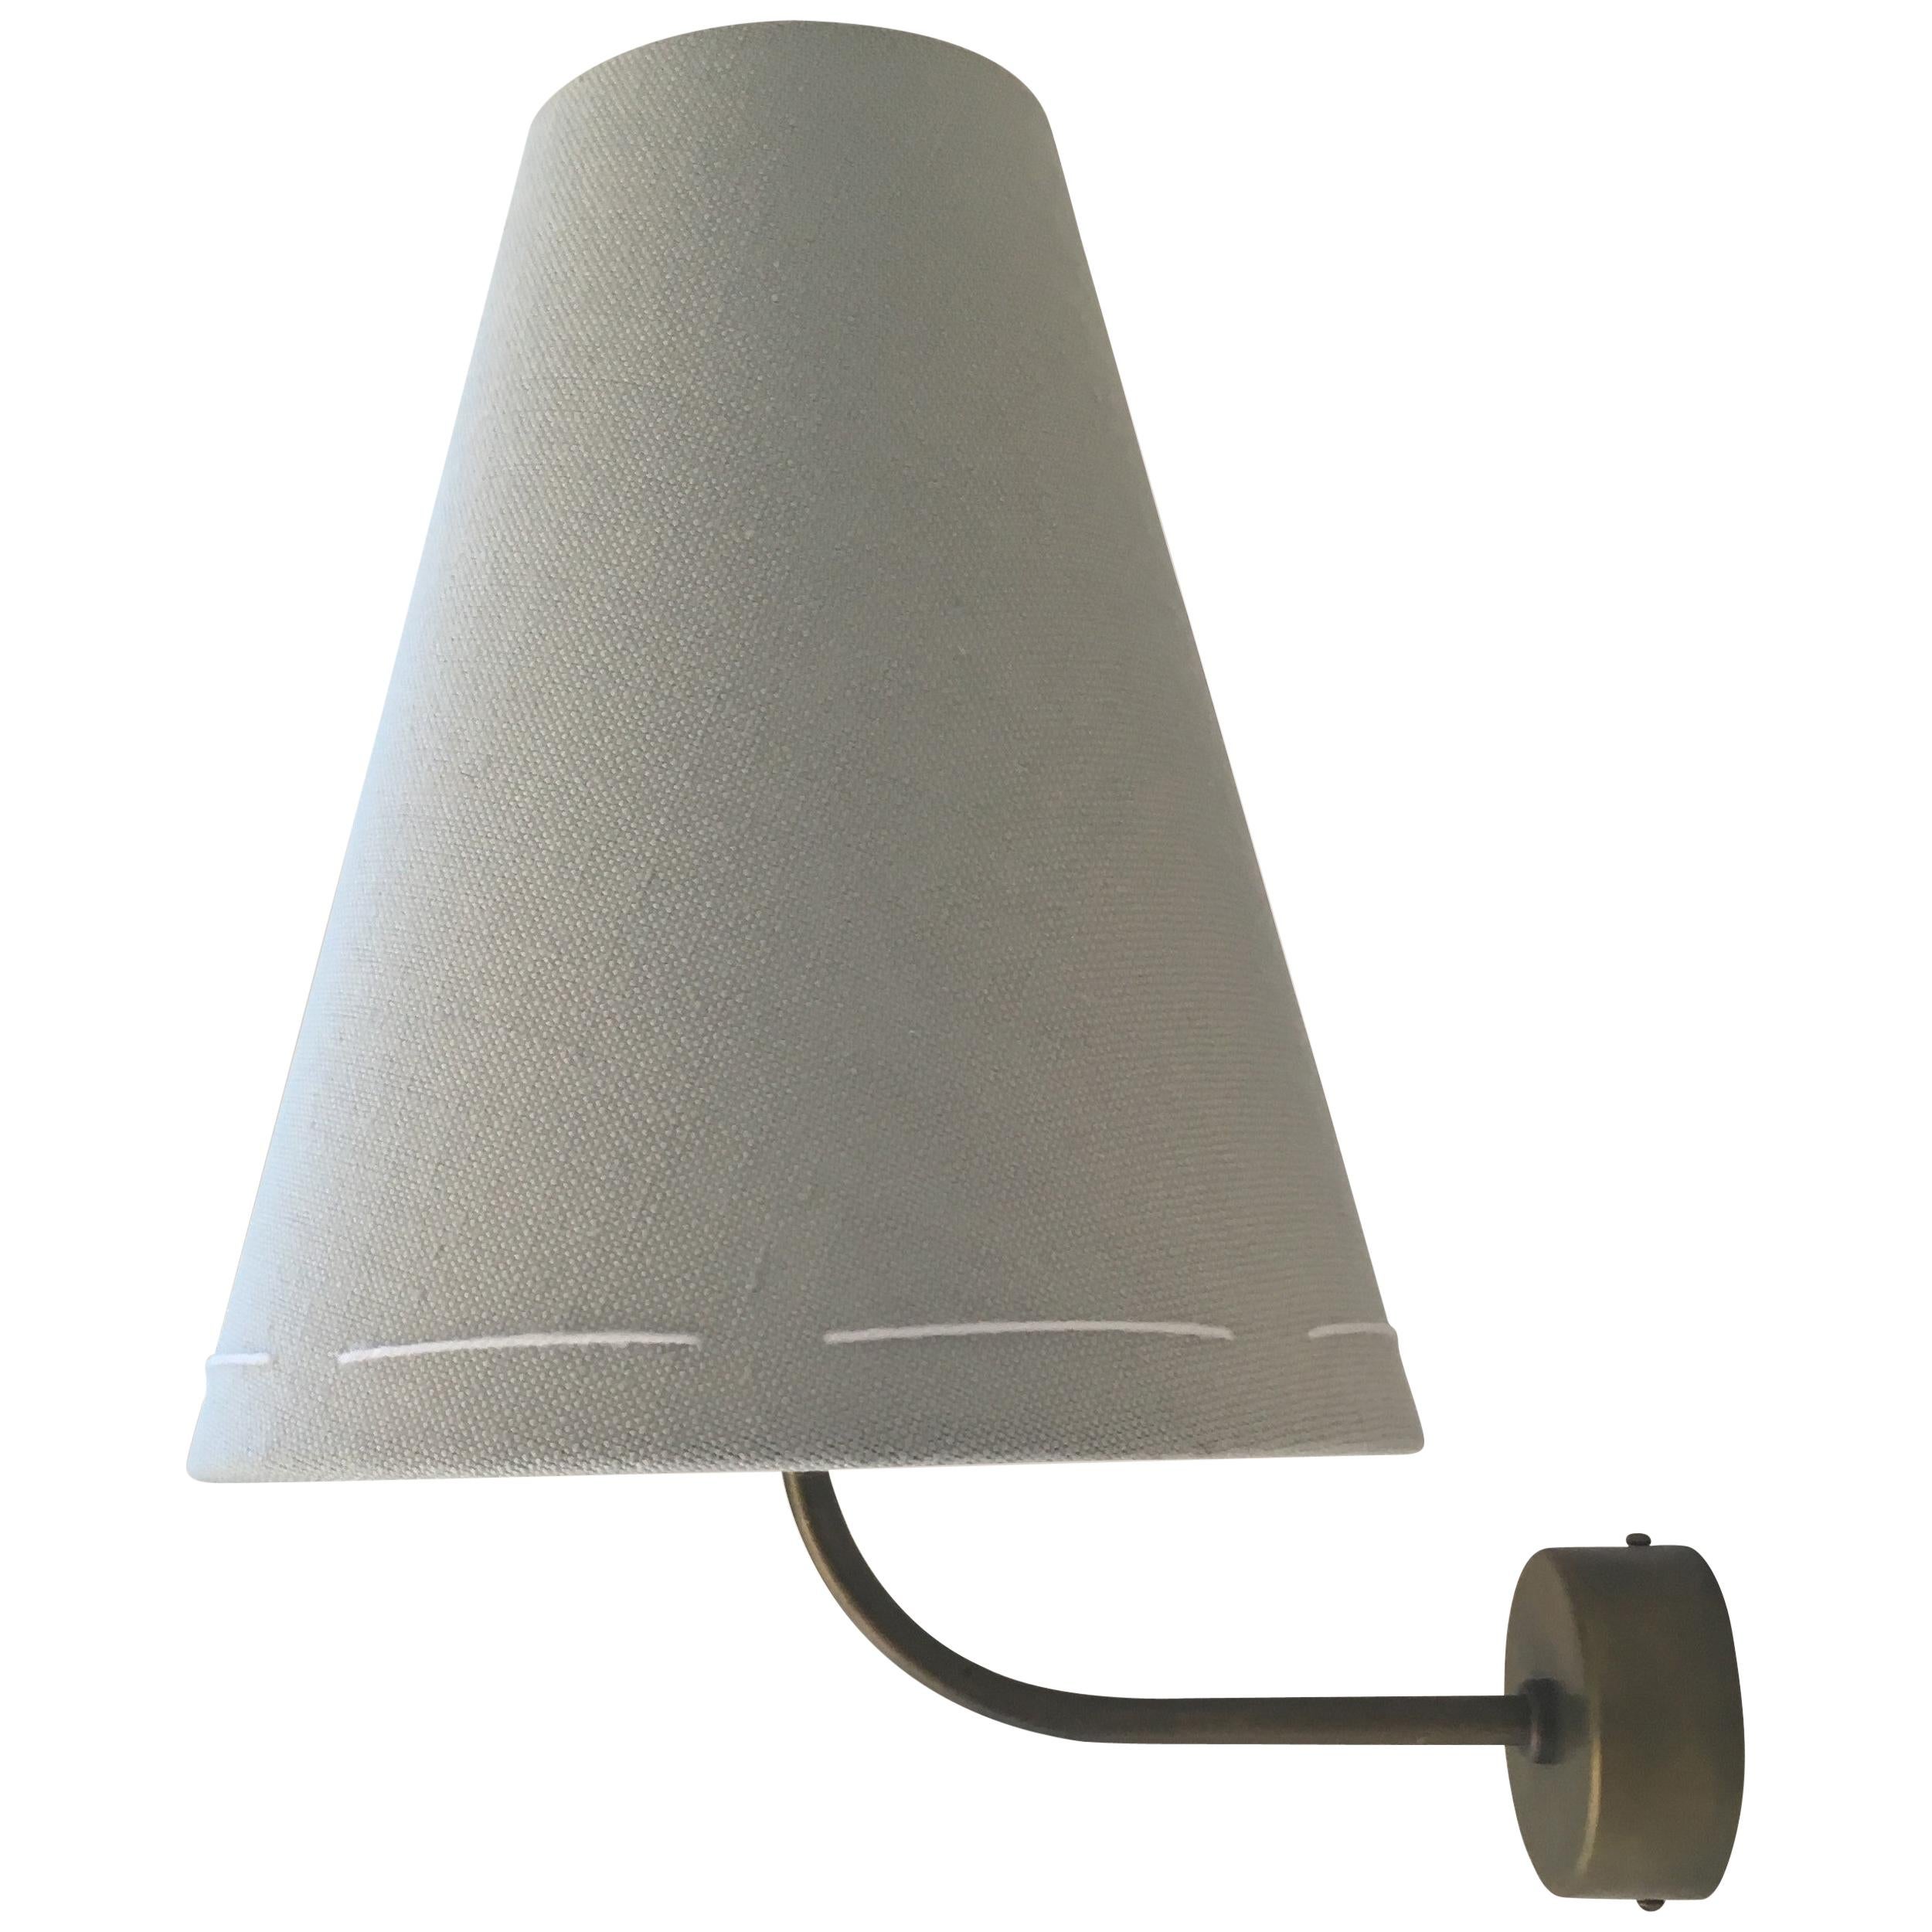  J 160 Wall Light by Wende Reid - Minimal Rustic Hand-stitched Linen and Brass For Sale